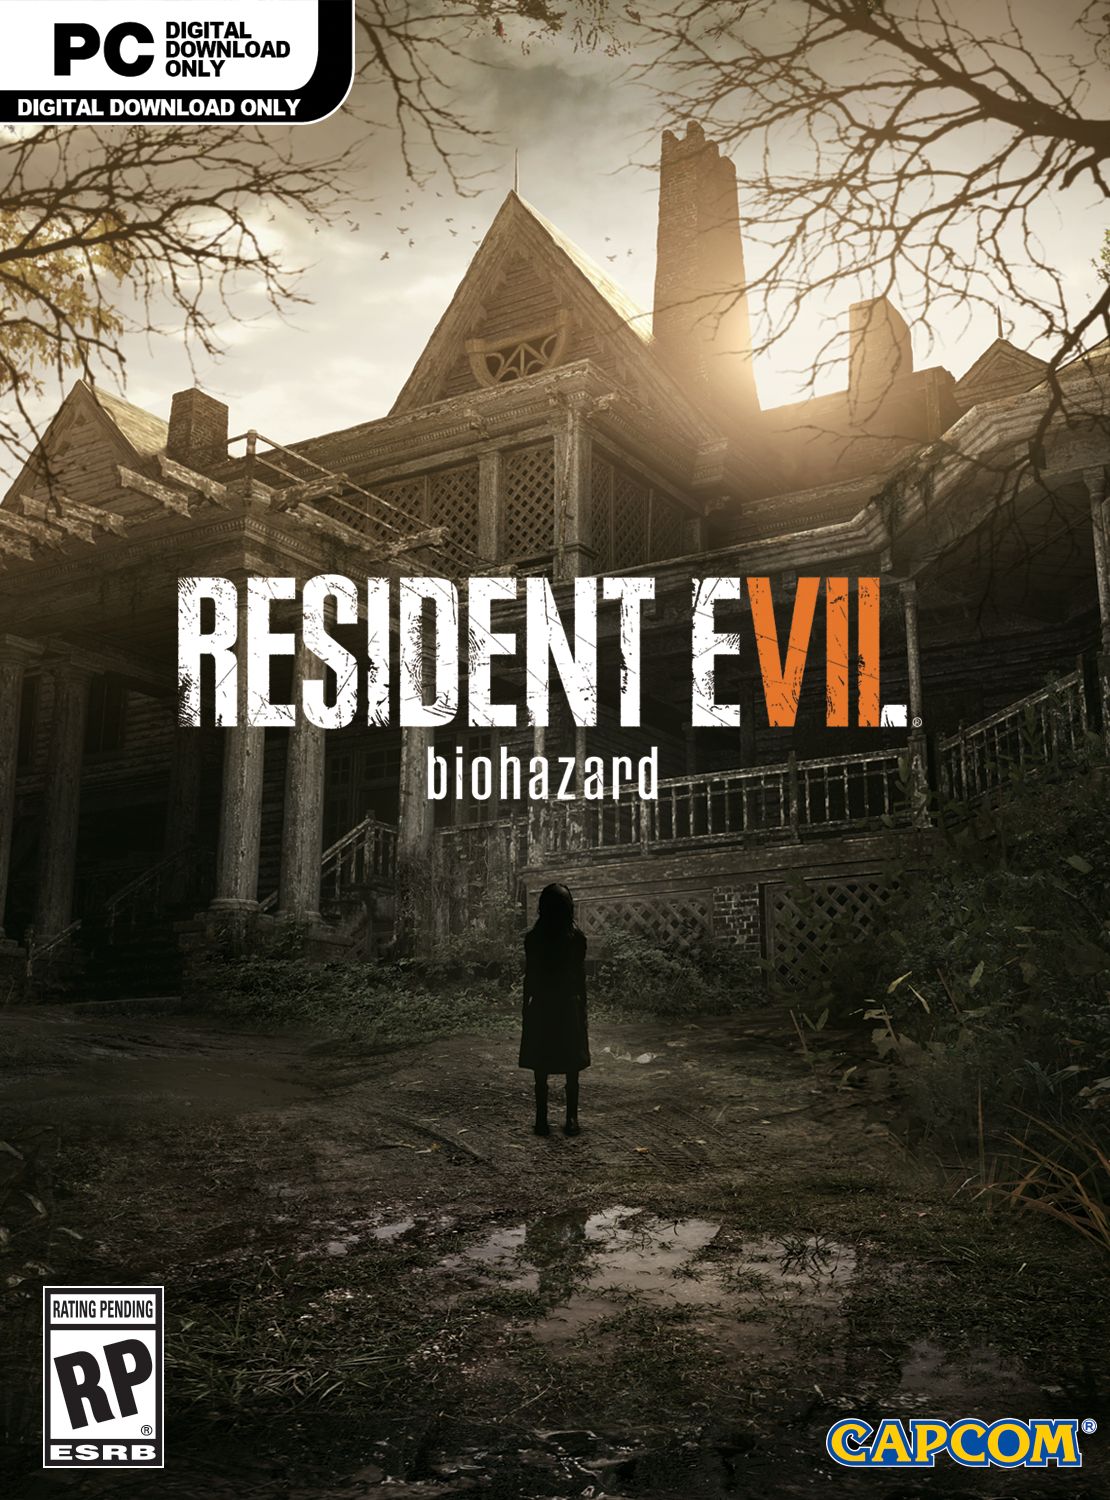 Resident evil for pc download free